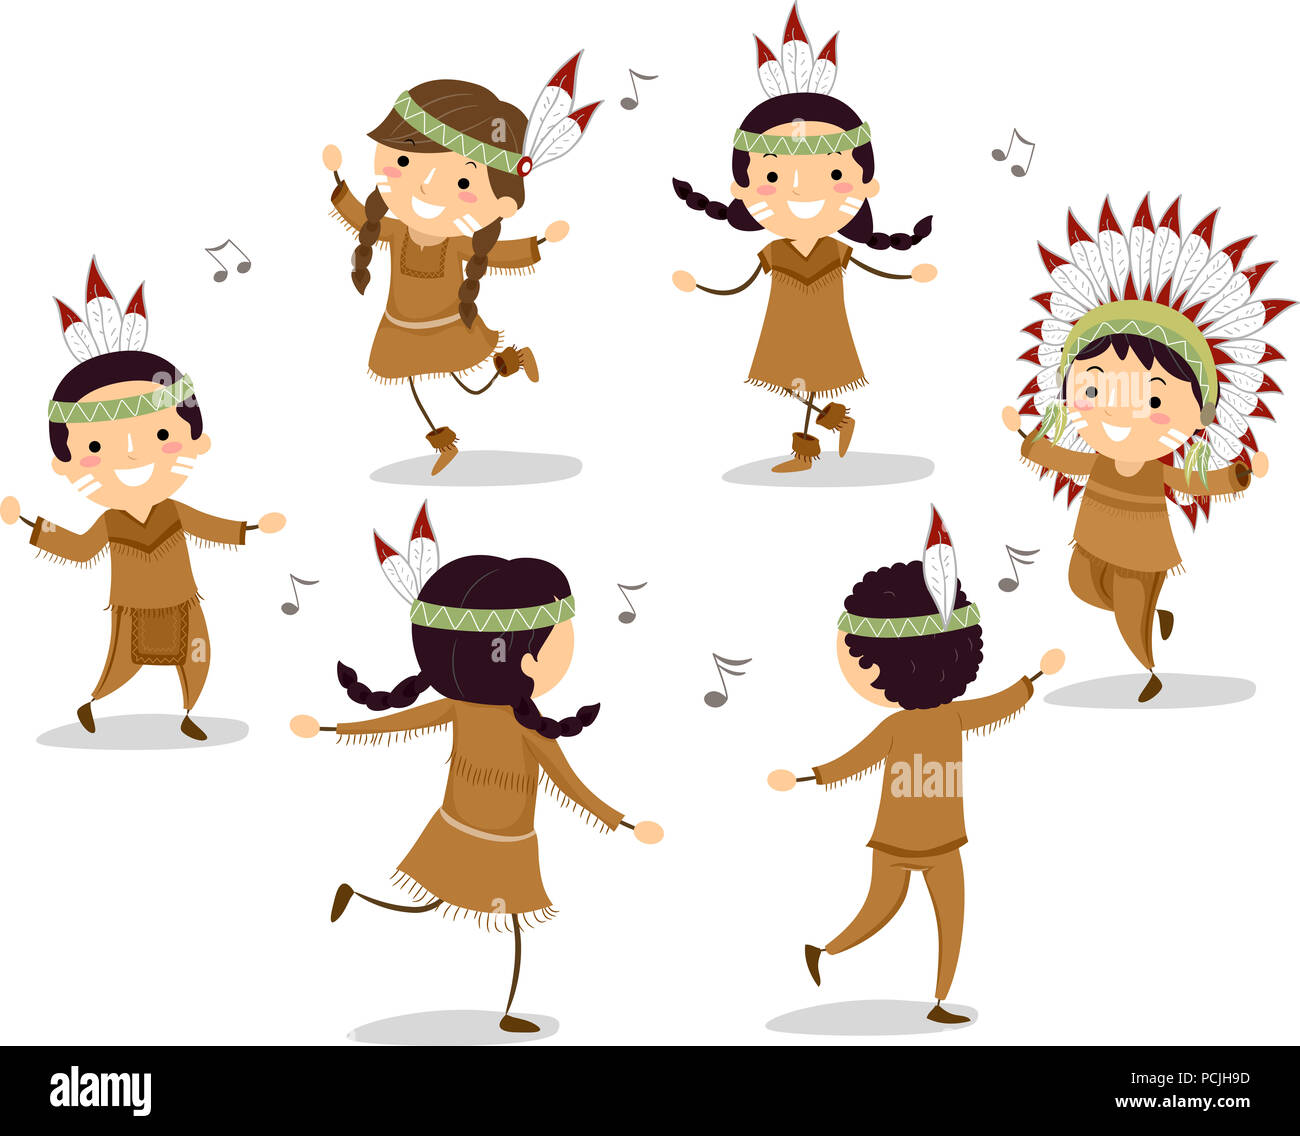 Illustration of Native American Stickman Kids Dancing in Circle to Music Stock Photo